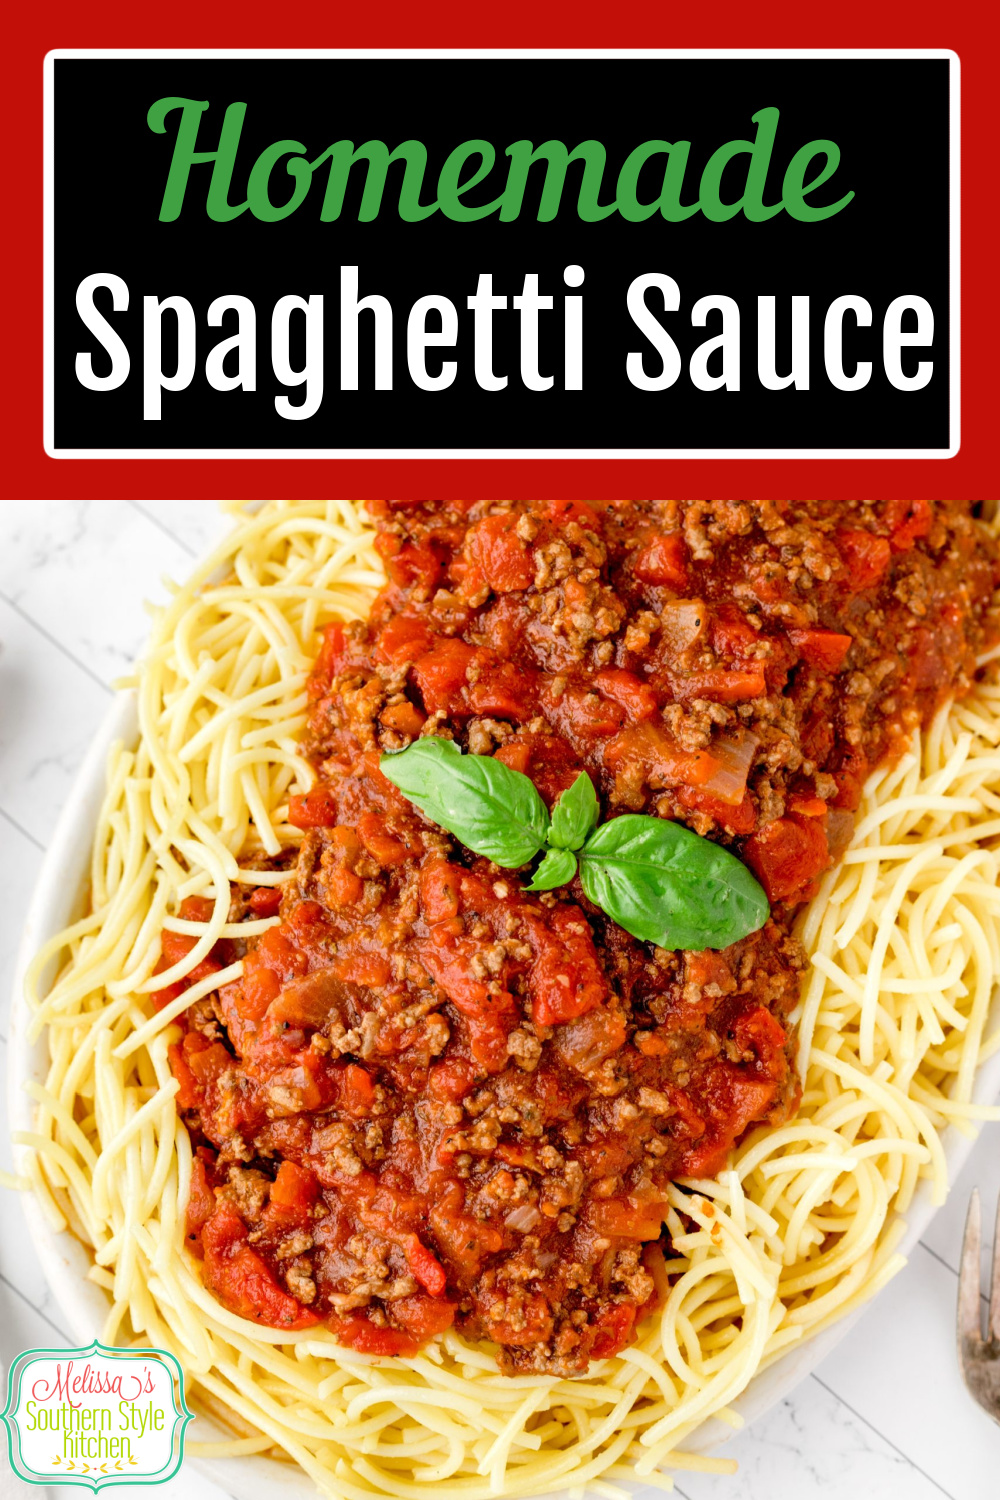 Serve this Homemade Spaghetti Sauce over cooked spaghetti topped with a sprinkle of grated Parmesan cheese and parsley #spaghettisauce #easygroundbeefrecipes #homemadepaghettisauce #Italianfood #spaghettirecipes #bestspaghettisaucerecipe via @melissasssk